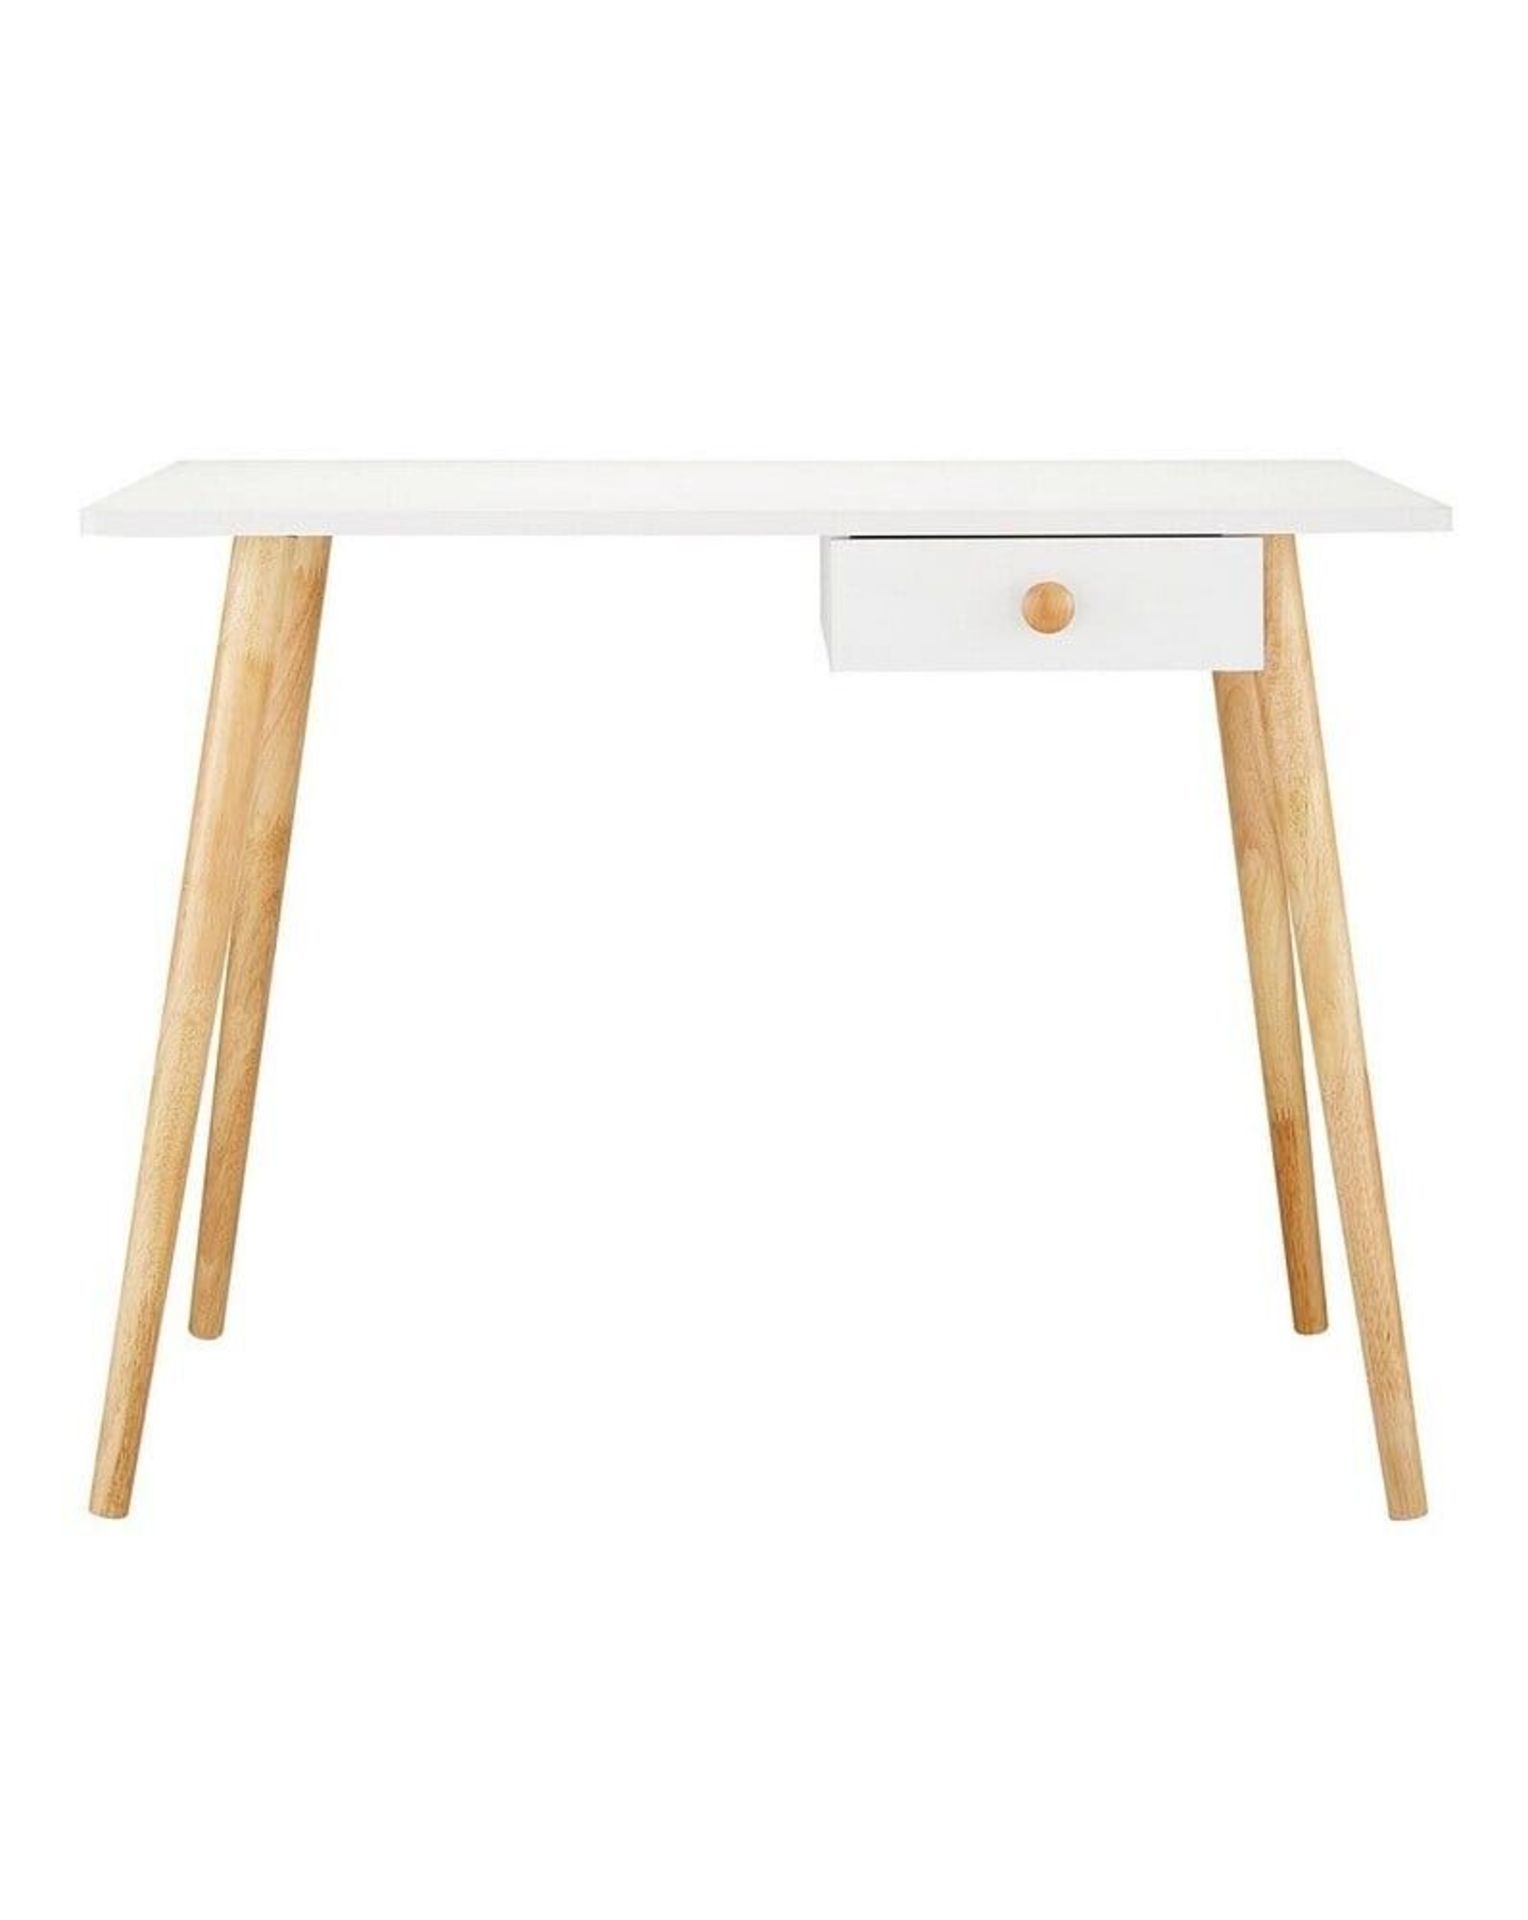 Brand new Olsen GREY DESK. R13-13Stylish as well as practical, the Olsen Desk is perfect for your